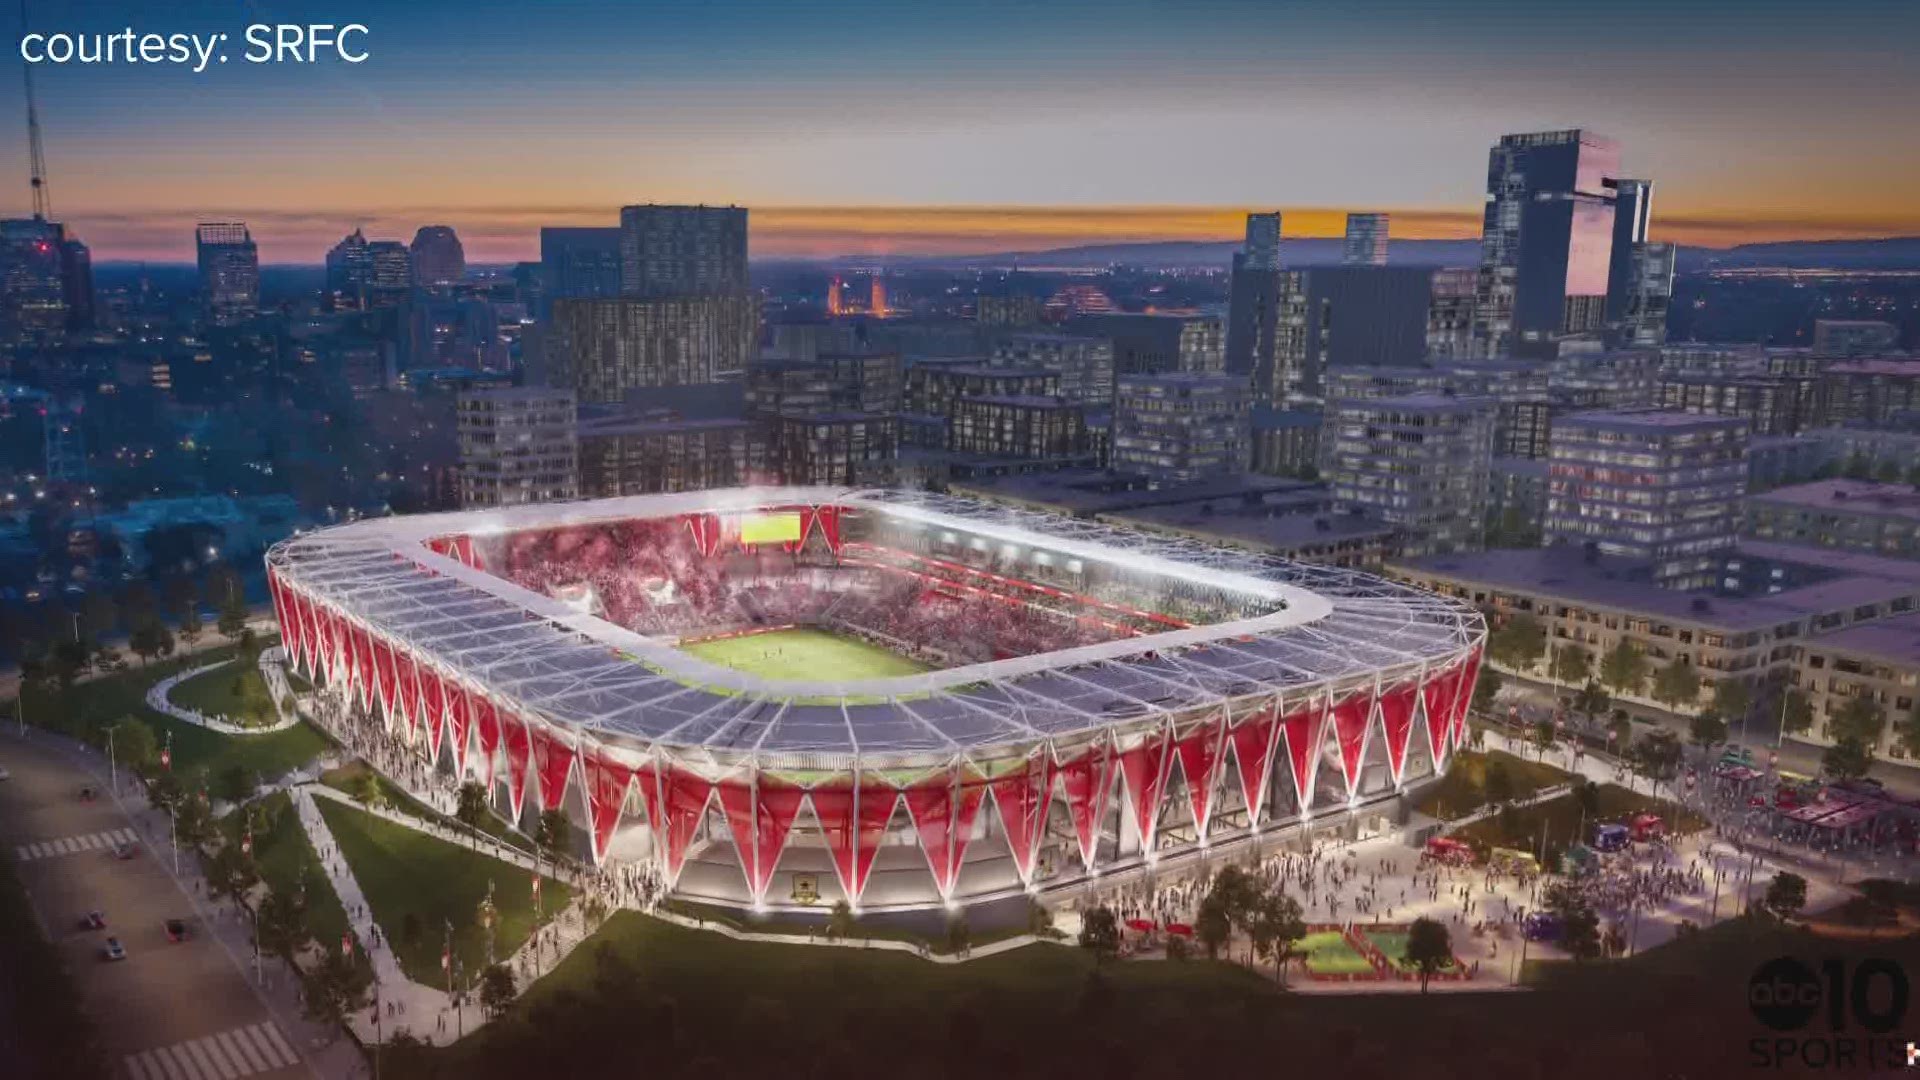 Sacramento's soccer saga continues as Republic FC releases updated renderings for a proposed MLS stadium contingent on California's capital city landing a Major League expansion team.